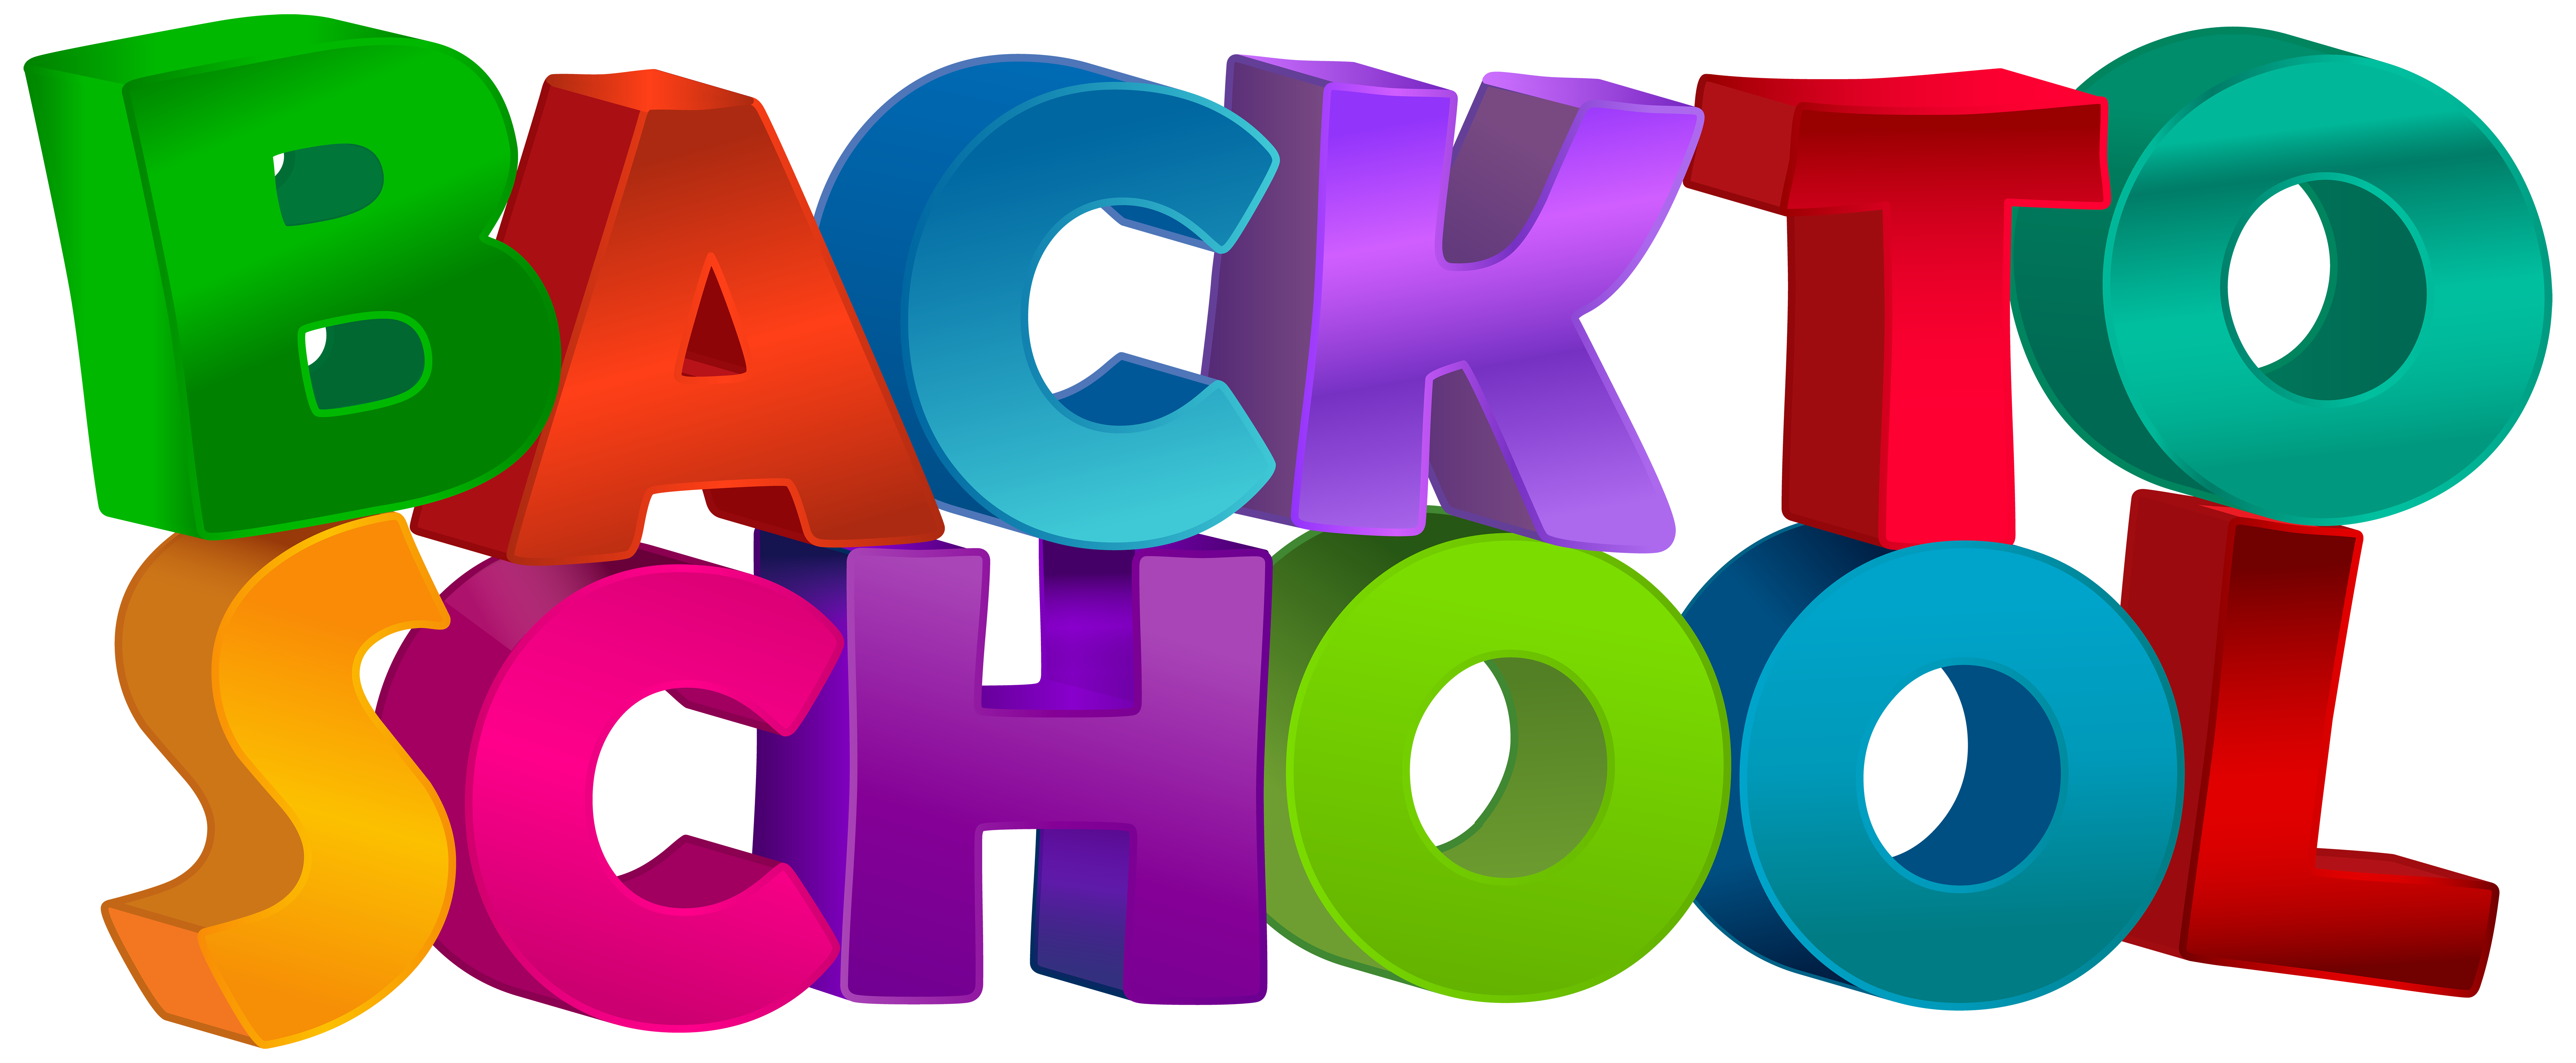 back to school clipart png